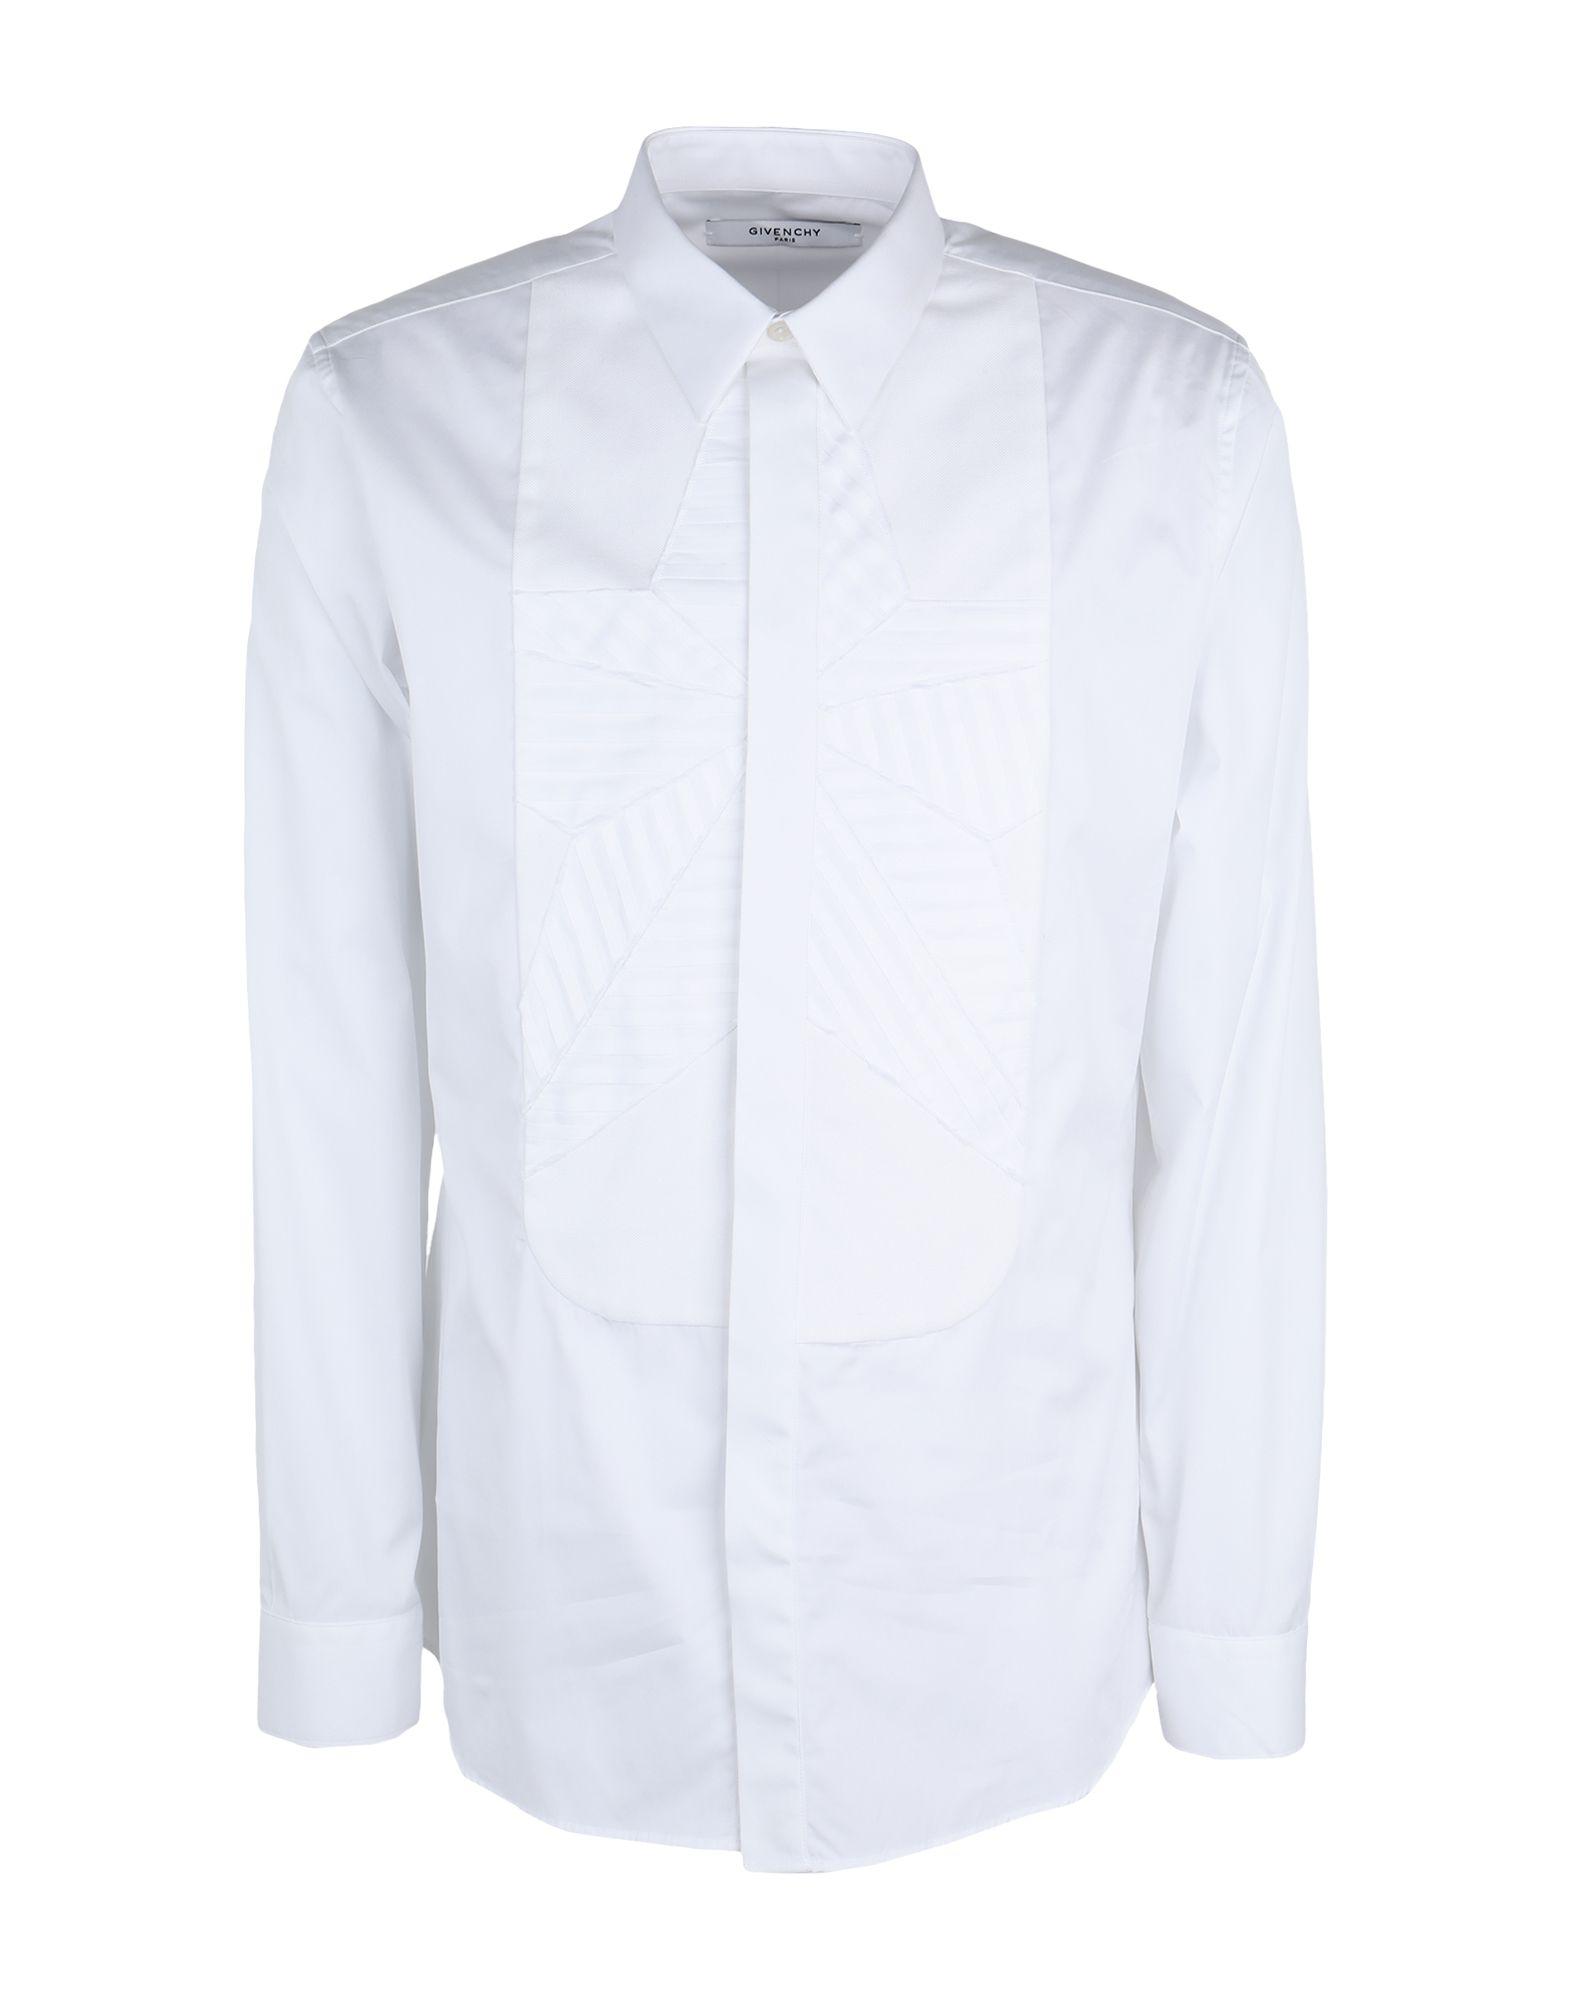 Givenchy Cotton Shirt in White for Men - Lyst